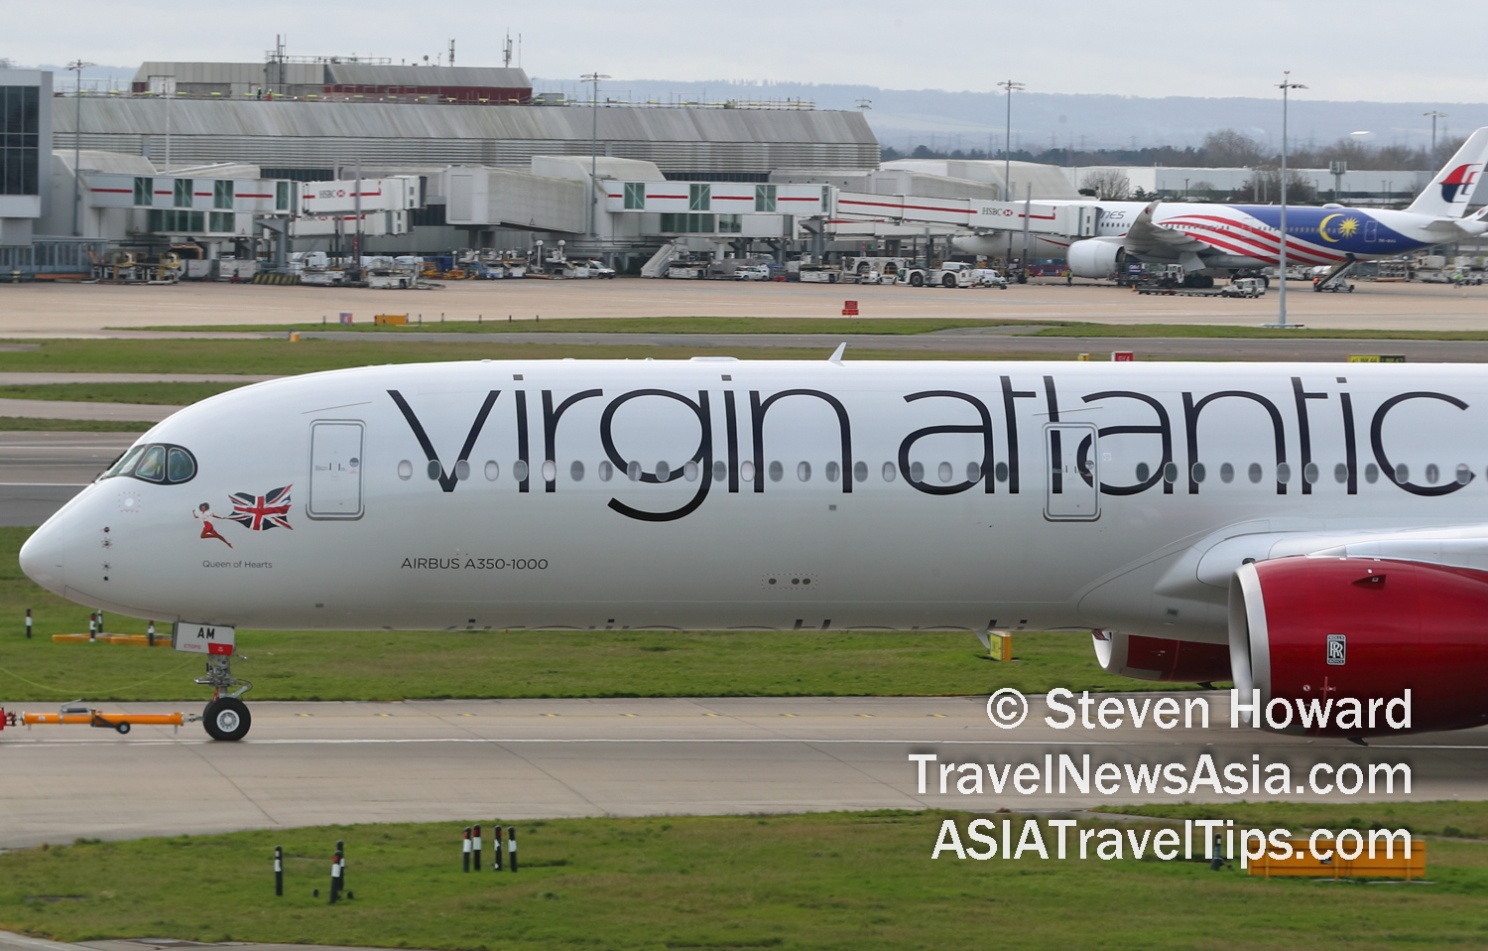 Virgin Atlantic A350-1000. Picture by Steven Howard of TravelNewsAsia.com Click to enlarge.